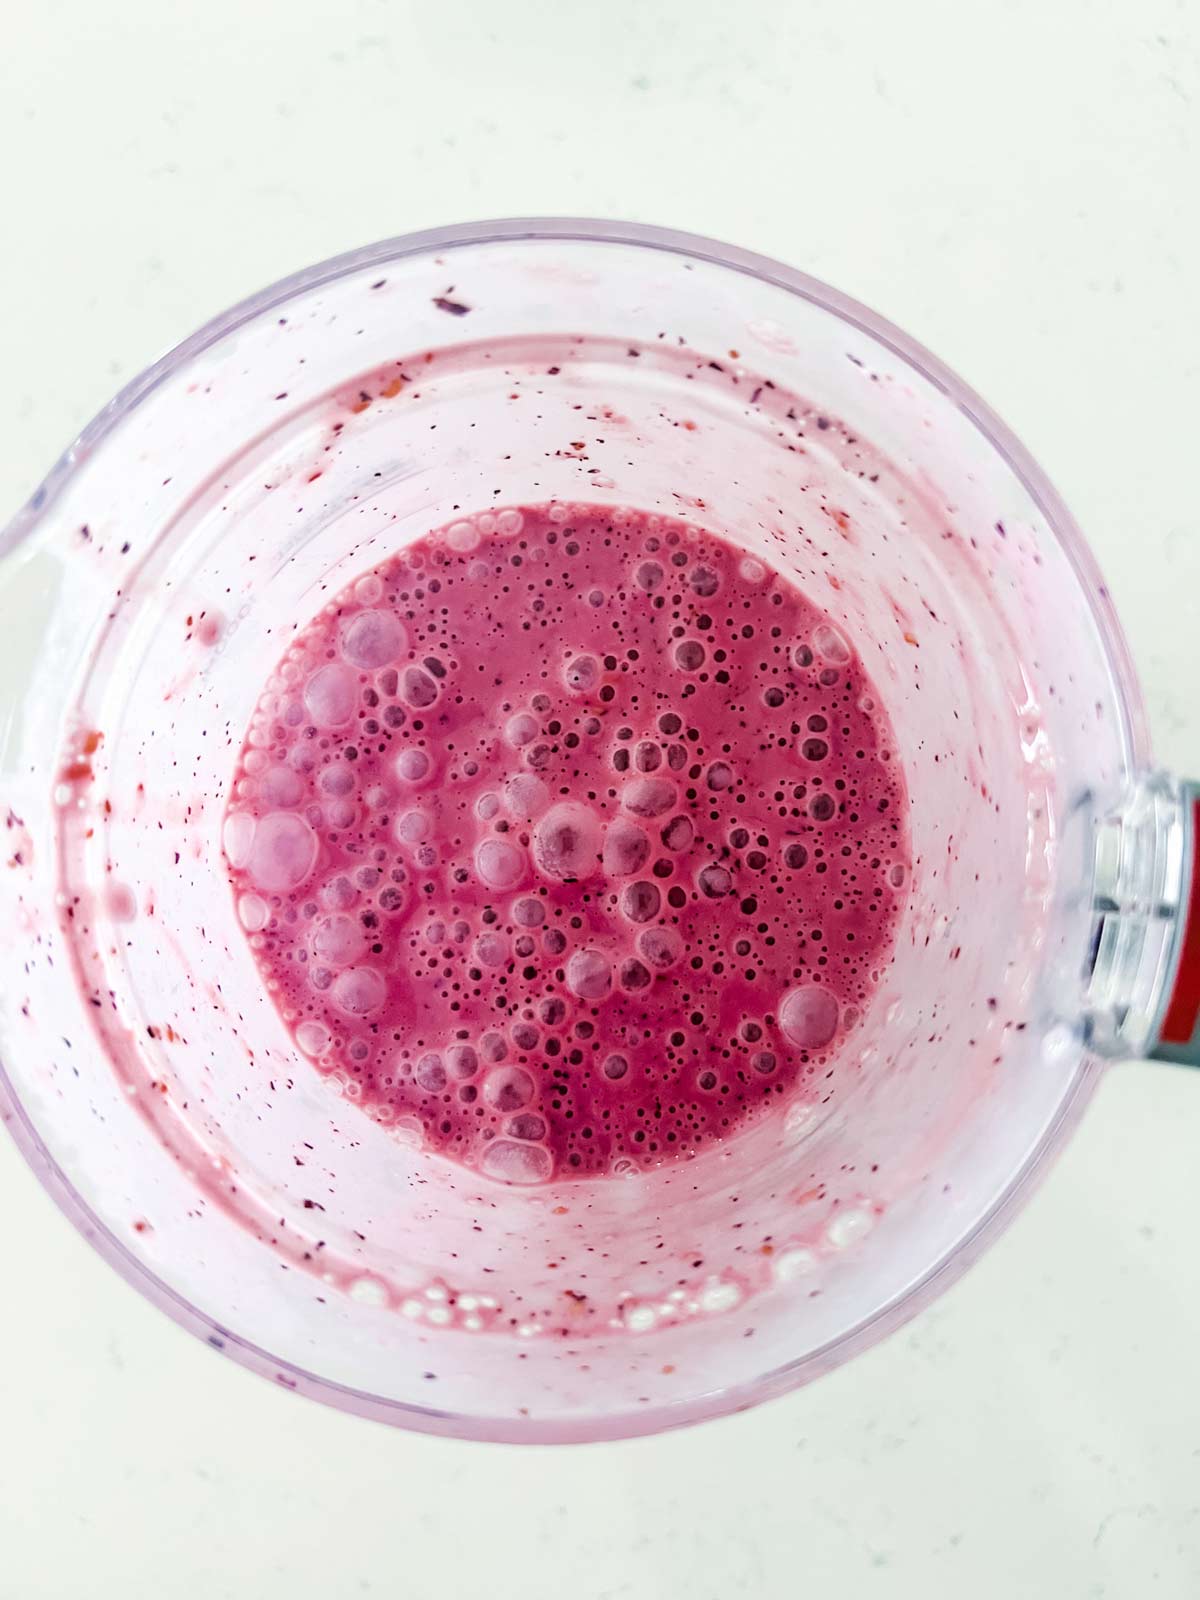 Raspberry blueberry smoothie in a blender.